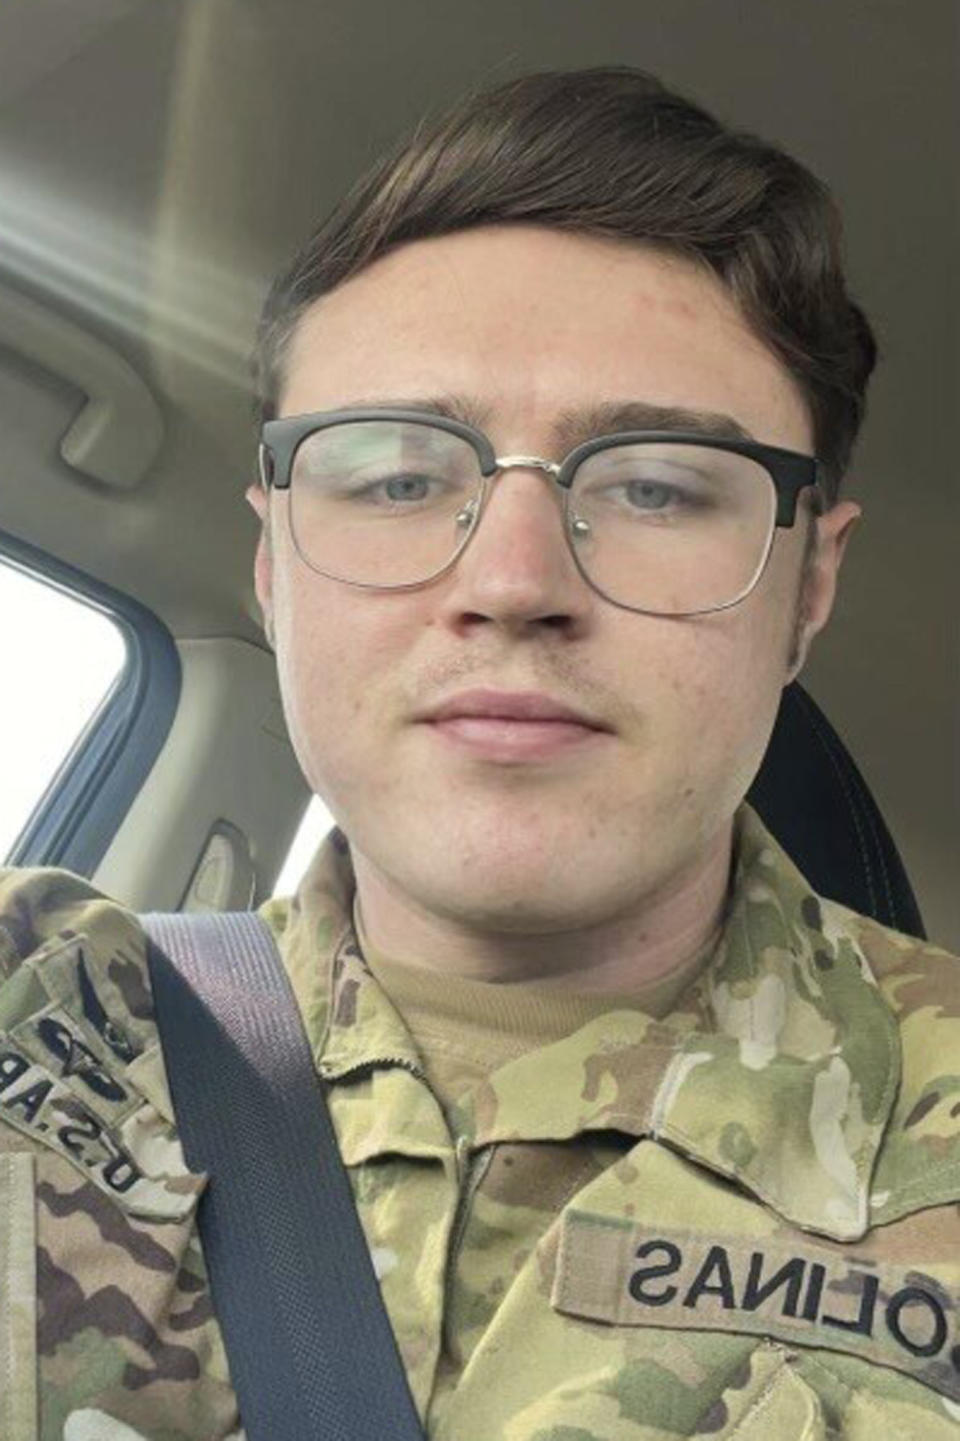 This photo provided by the 101st Airborne Division Office of Public Affairs at Fort Campbell, Ky., shows Sgt. David Solinas Jr., 23, of Oradell, N.J. Solinas was one of nine soldiers killed in a helicopter crash Wednesday evening, March 29, 2023. (101st Airborne Division Office of Public Affairs via AP)